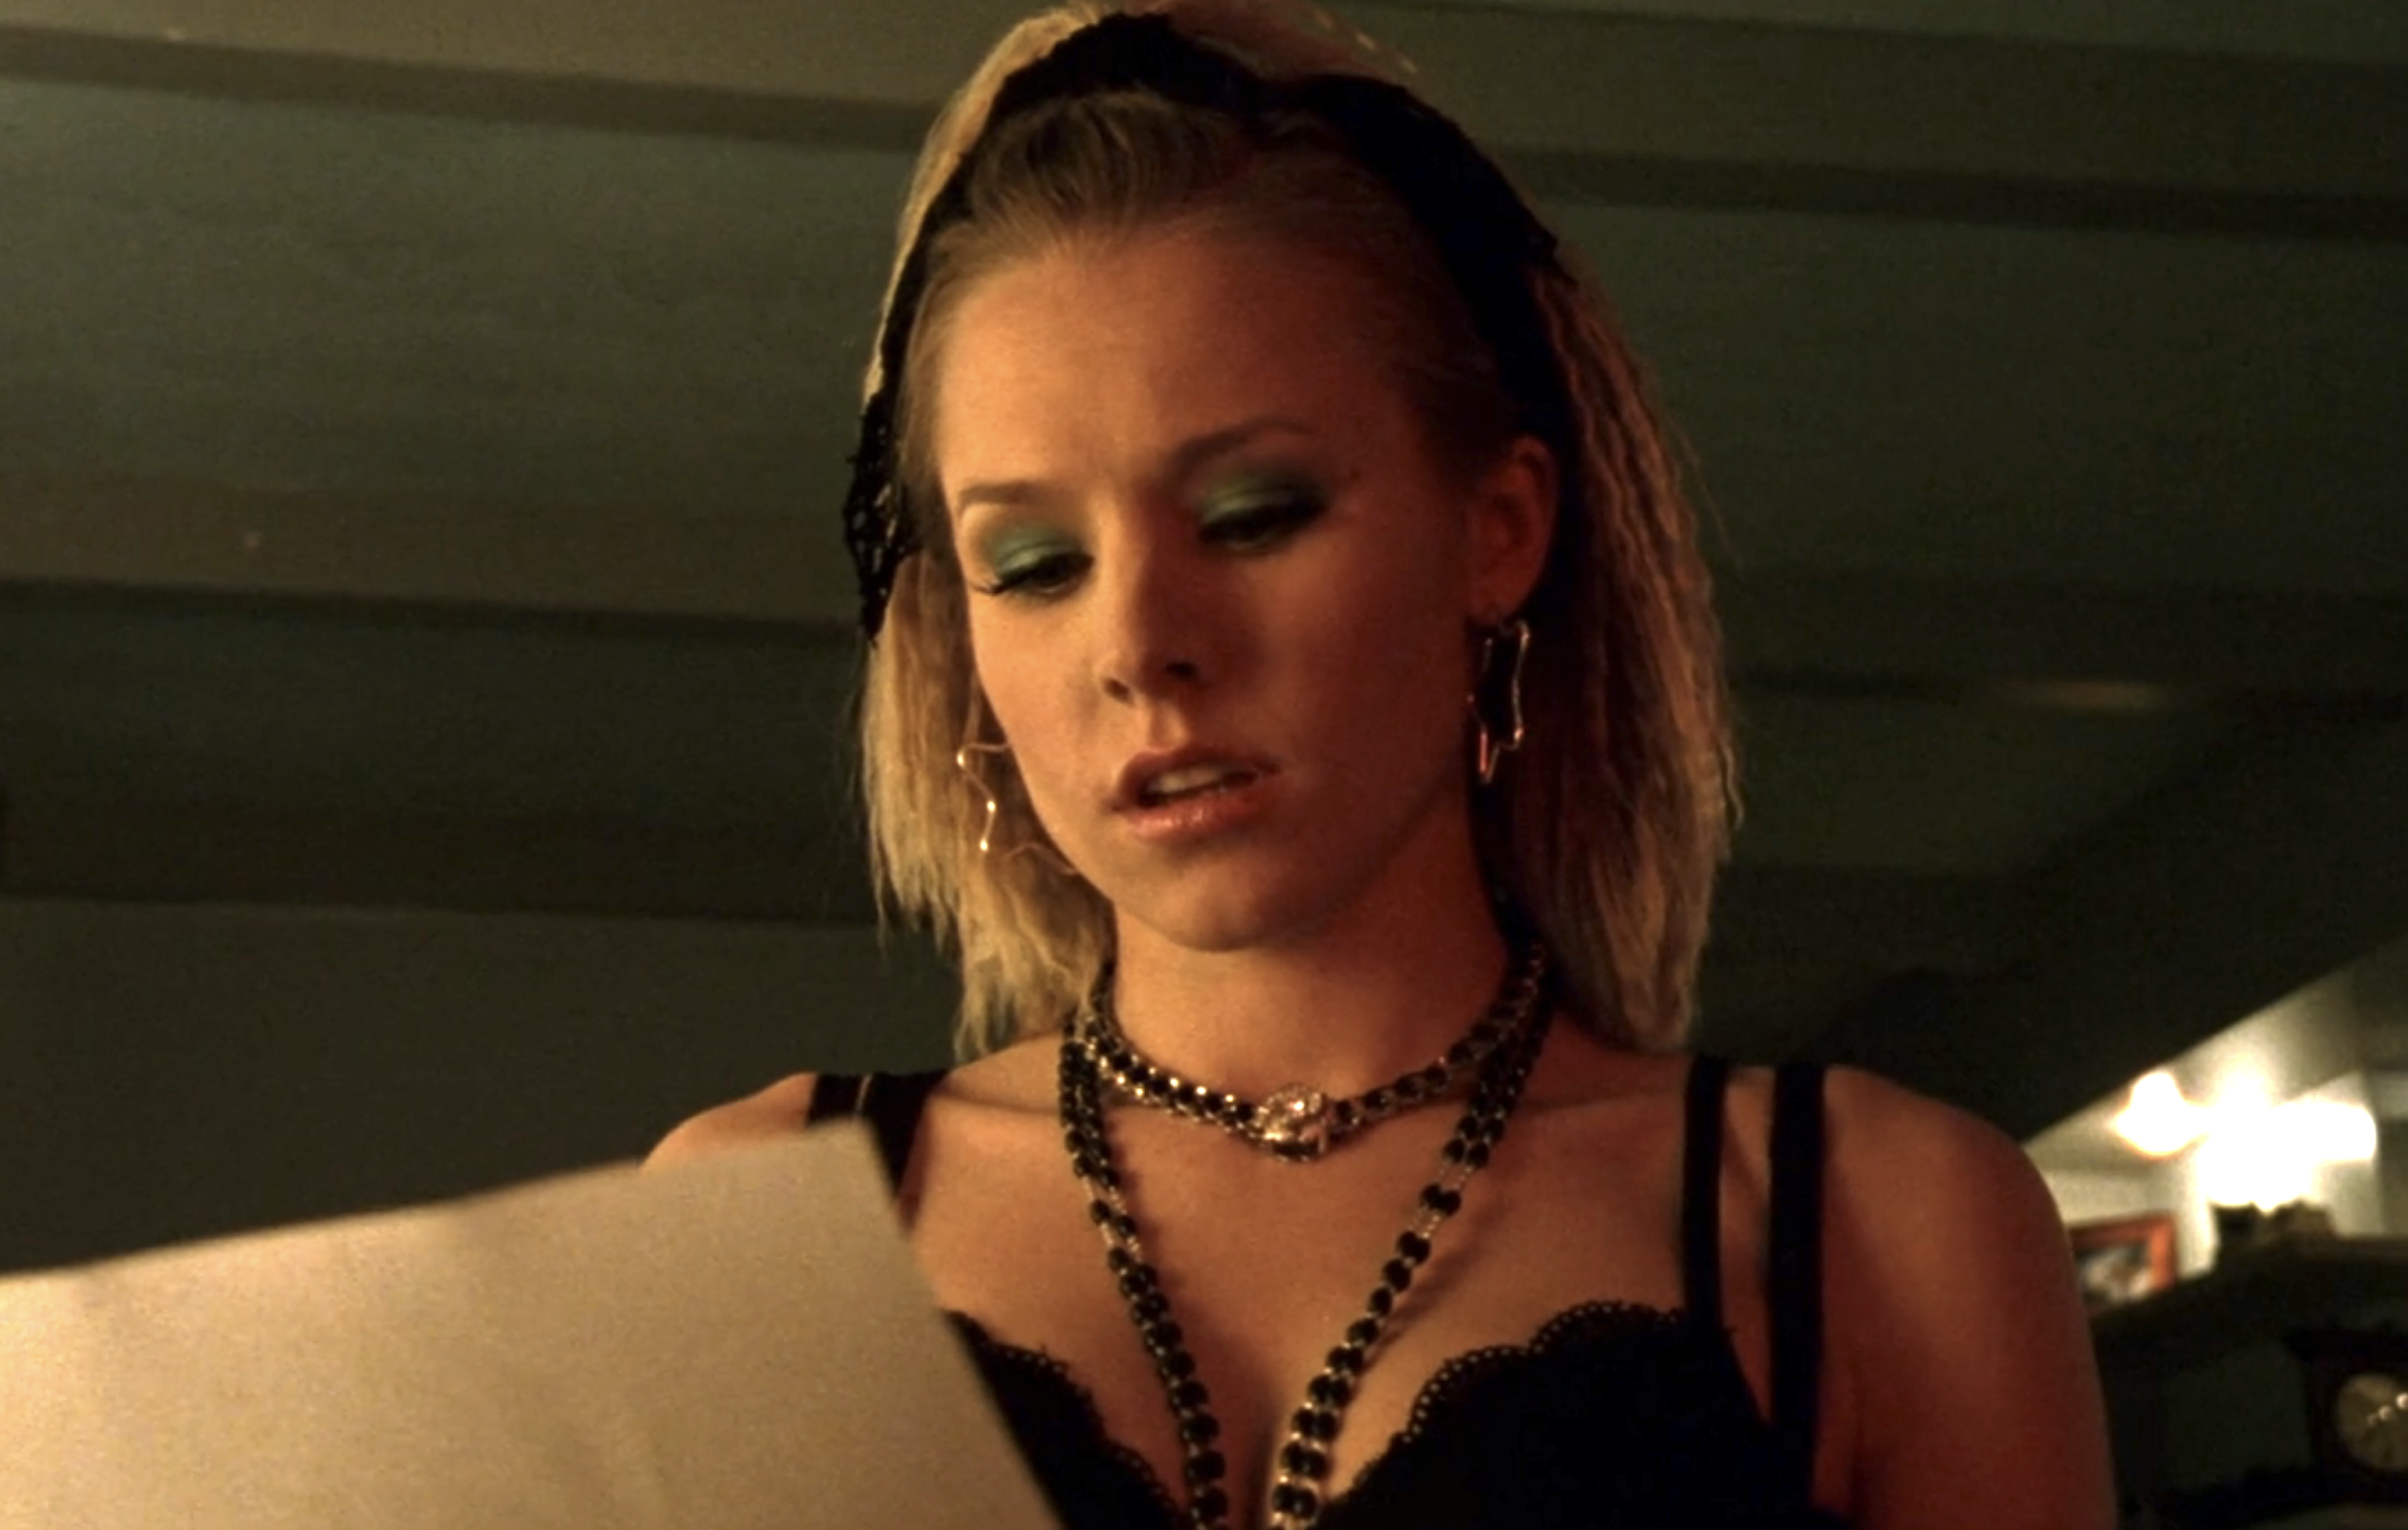 Screenshot from Veronica Mars S1E15. Veronica is dressed like Lucky Star era Madonna. She has crimped hair, black necklaces, big siver earrings, and green eyeshadow. She is looking at a letter.